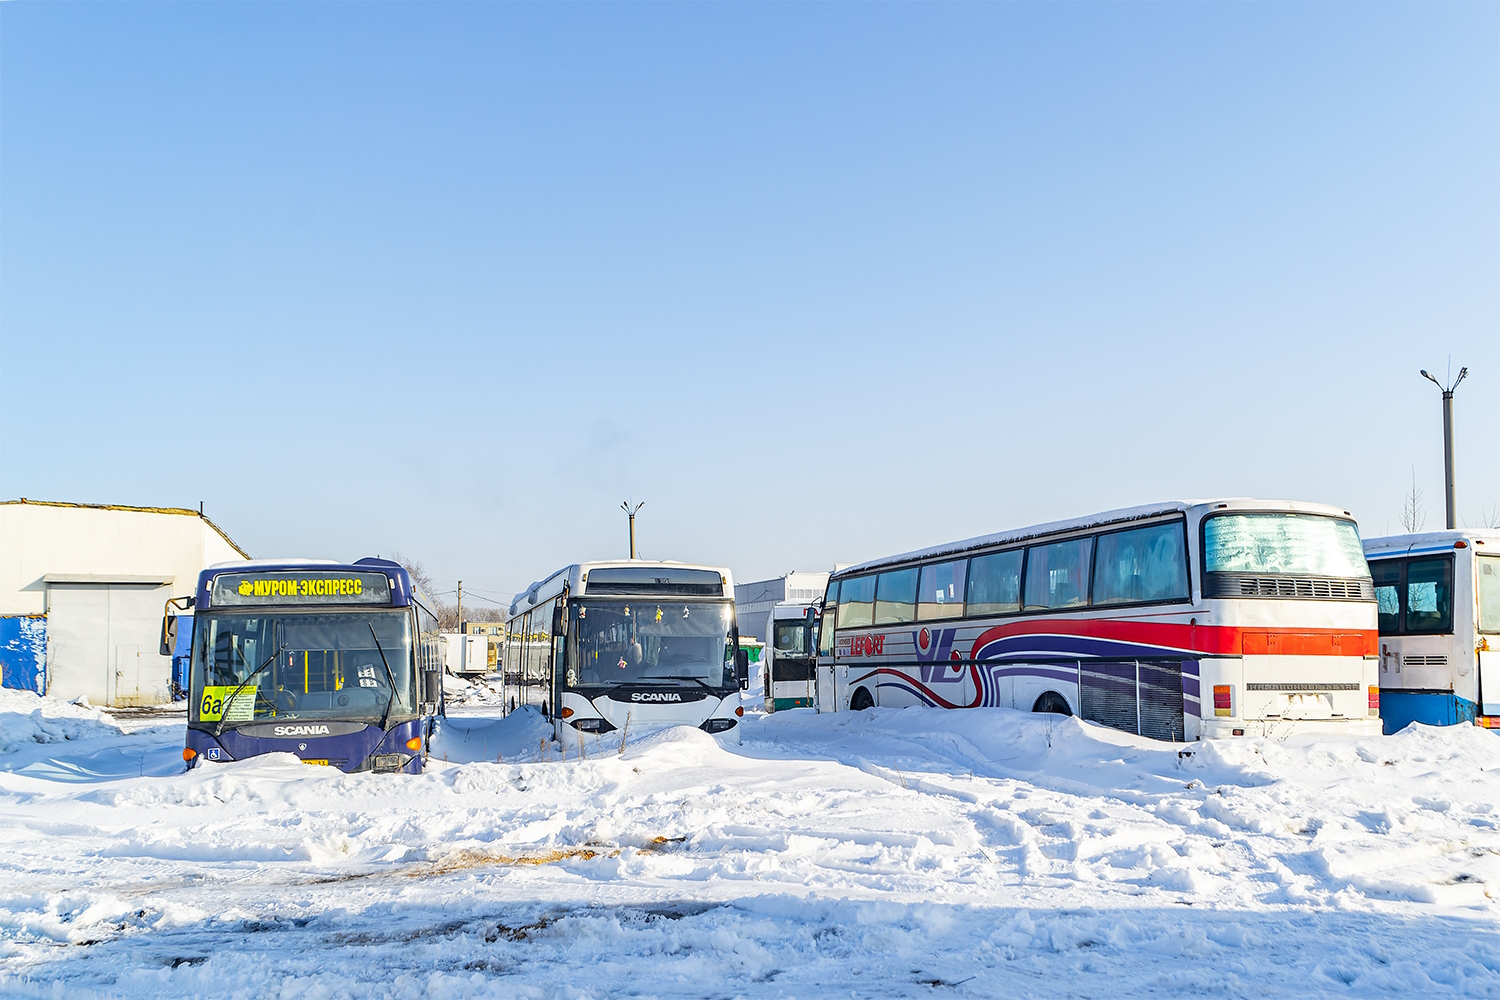 Penza — ATP; Penza — Buses without numbers